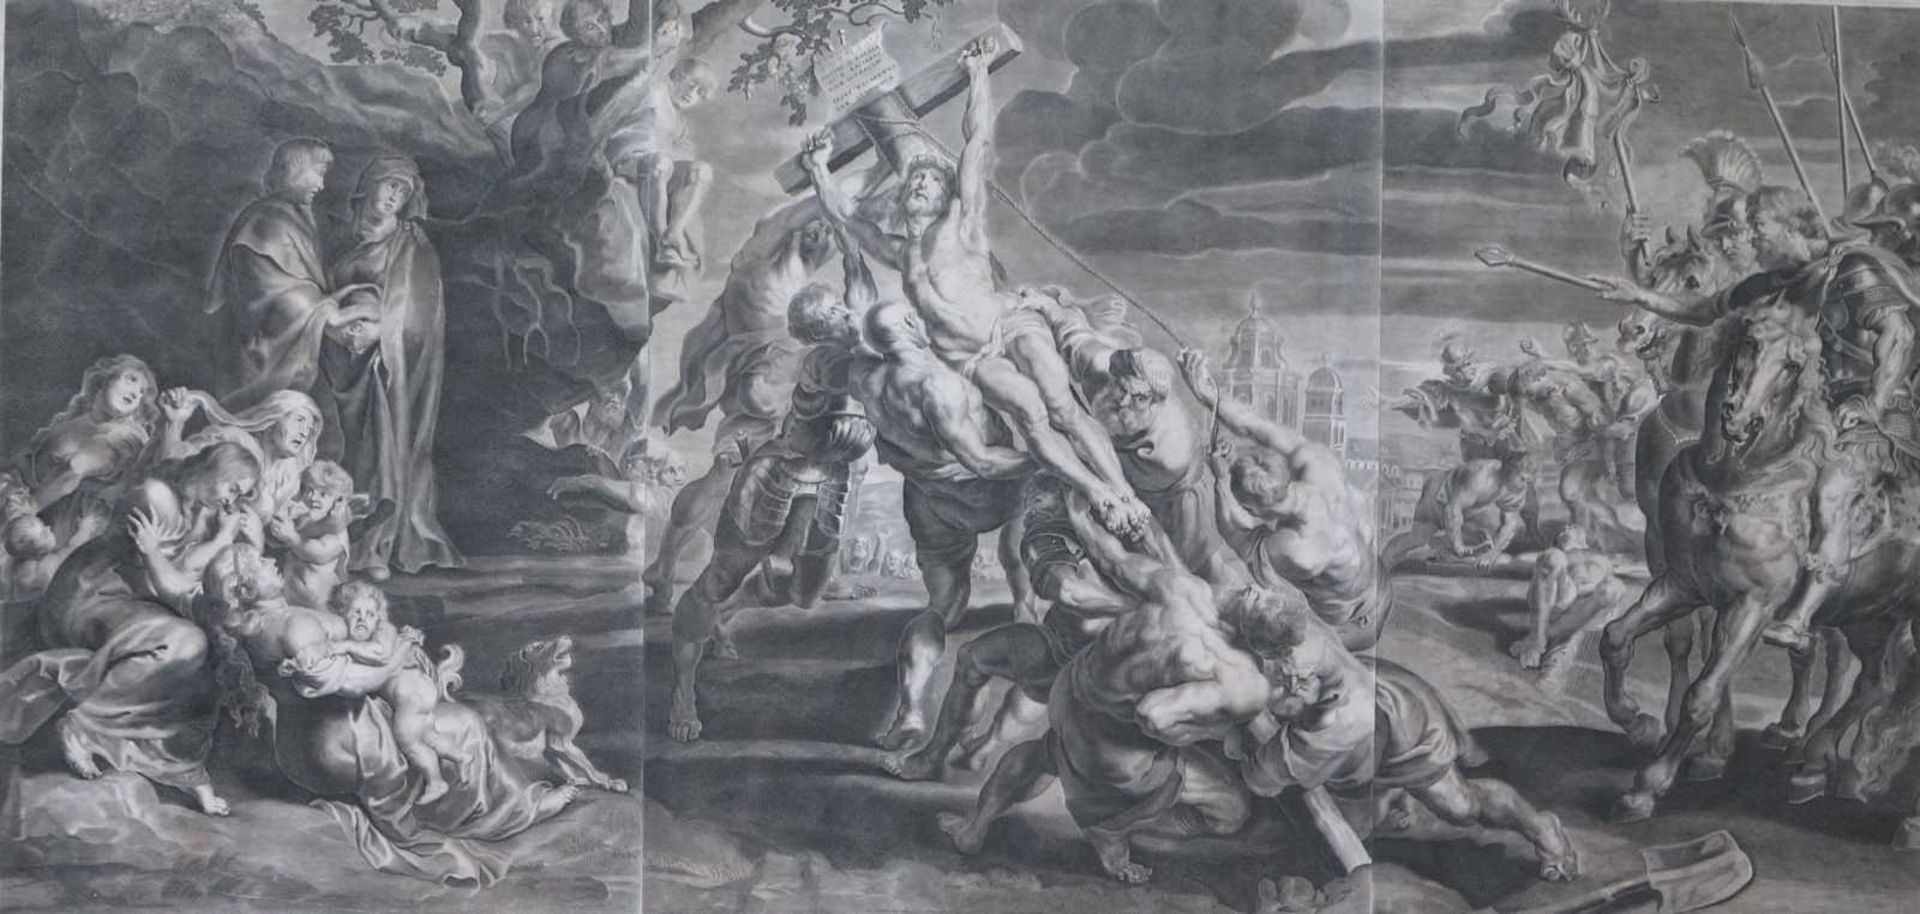 Engraving Rubens Etched by Chereau (1732) on 3 folio sheets 123 x 59 cm